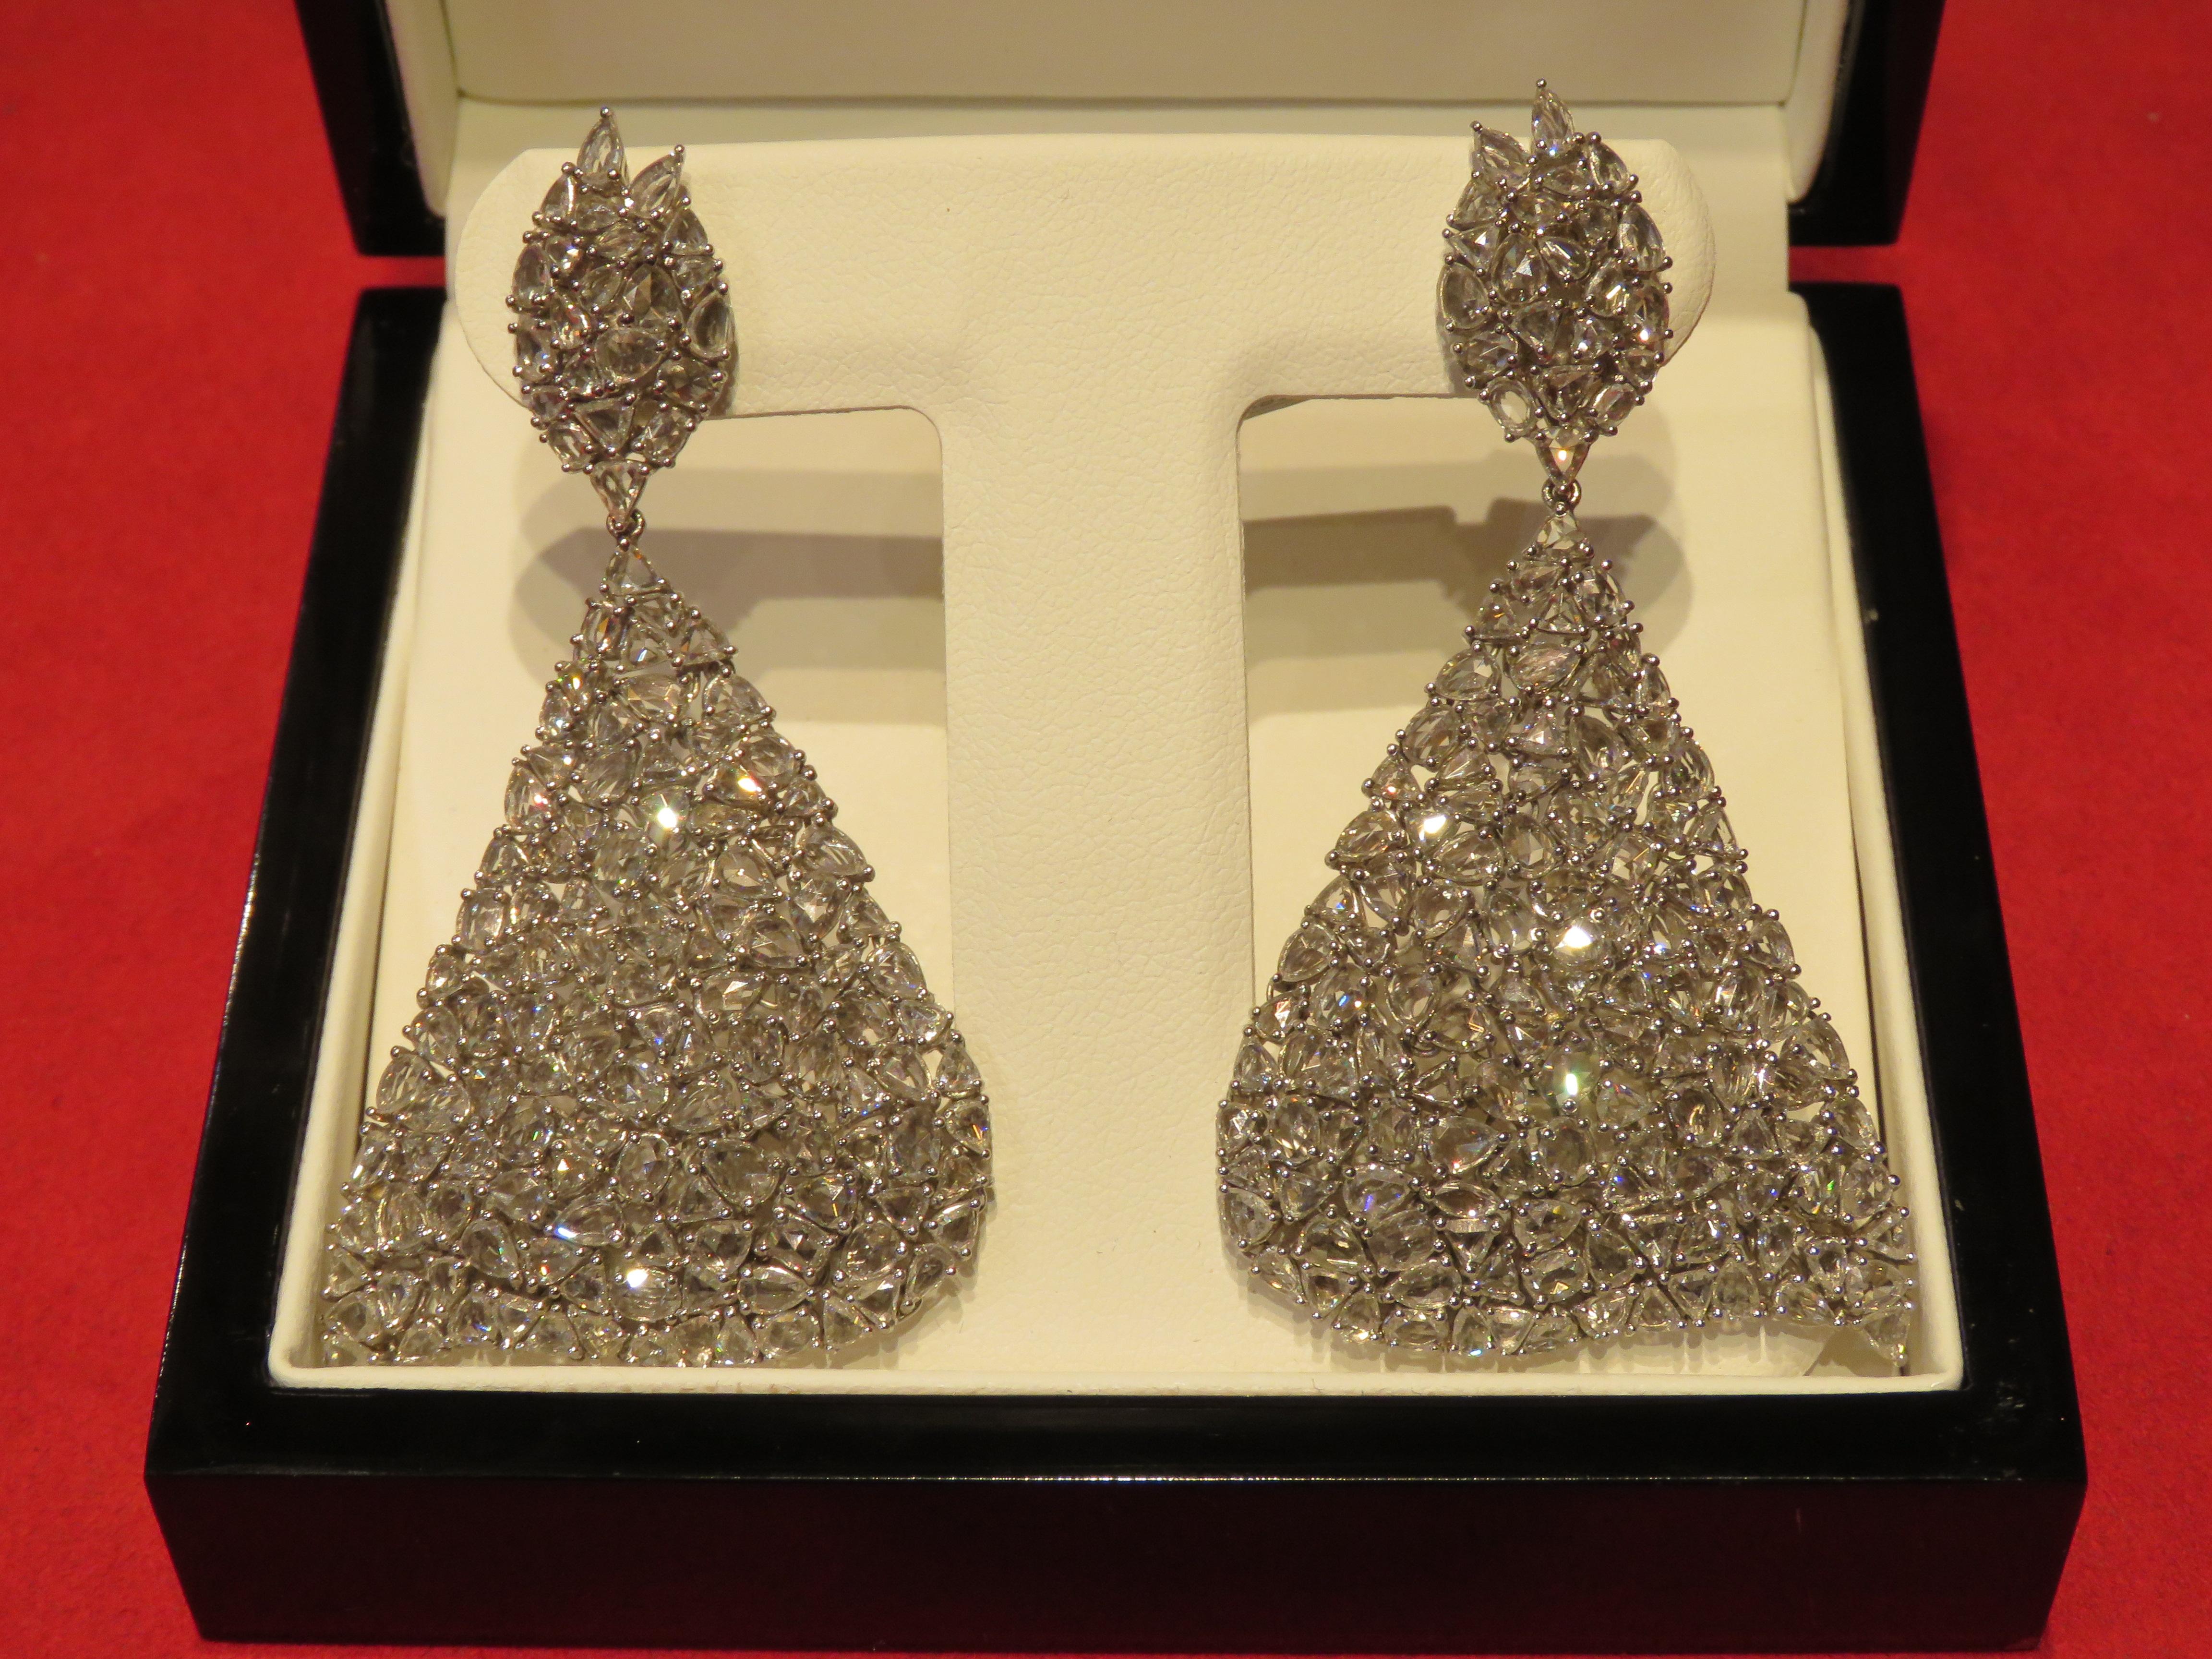 The Following Item we are offering are these Extremely Rare Beautiful 18KT Gold Fine Large Rosecut Diamond Dangle Drape Earrings. Each Earring features Rare Gorgeous Glittering Fancy Brilliant Rosecut Diamonds in 18KT Gold. T.C.W. Over 16CTS!!! The